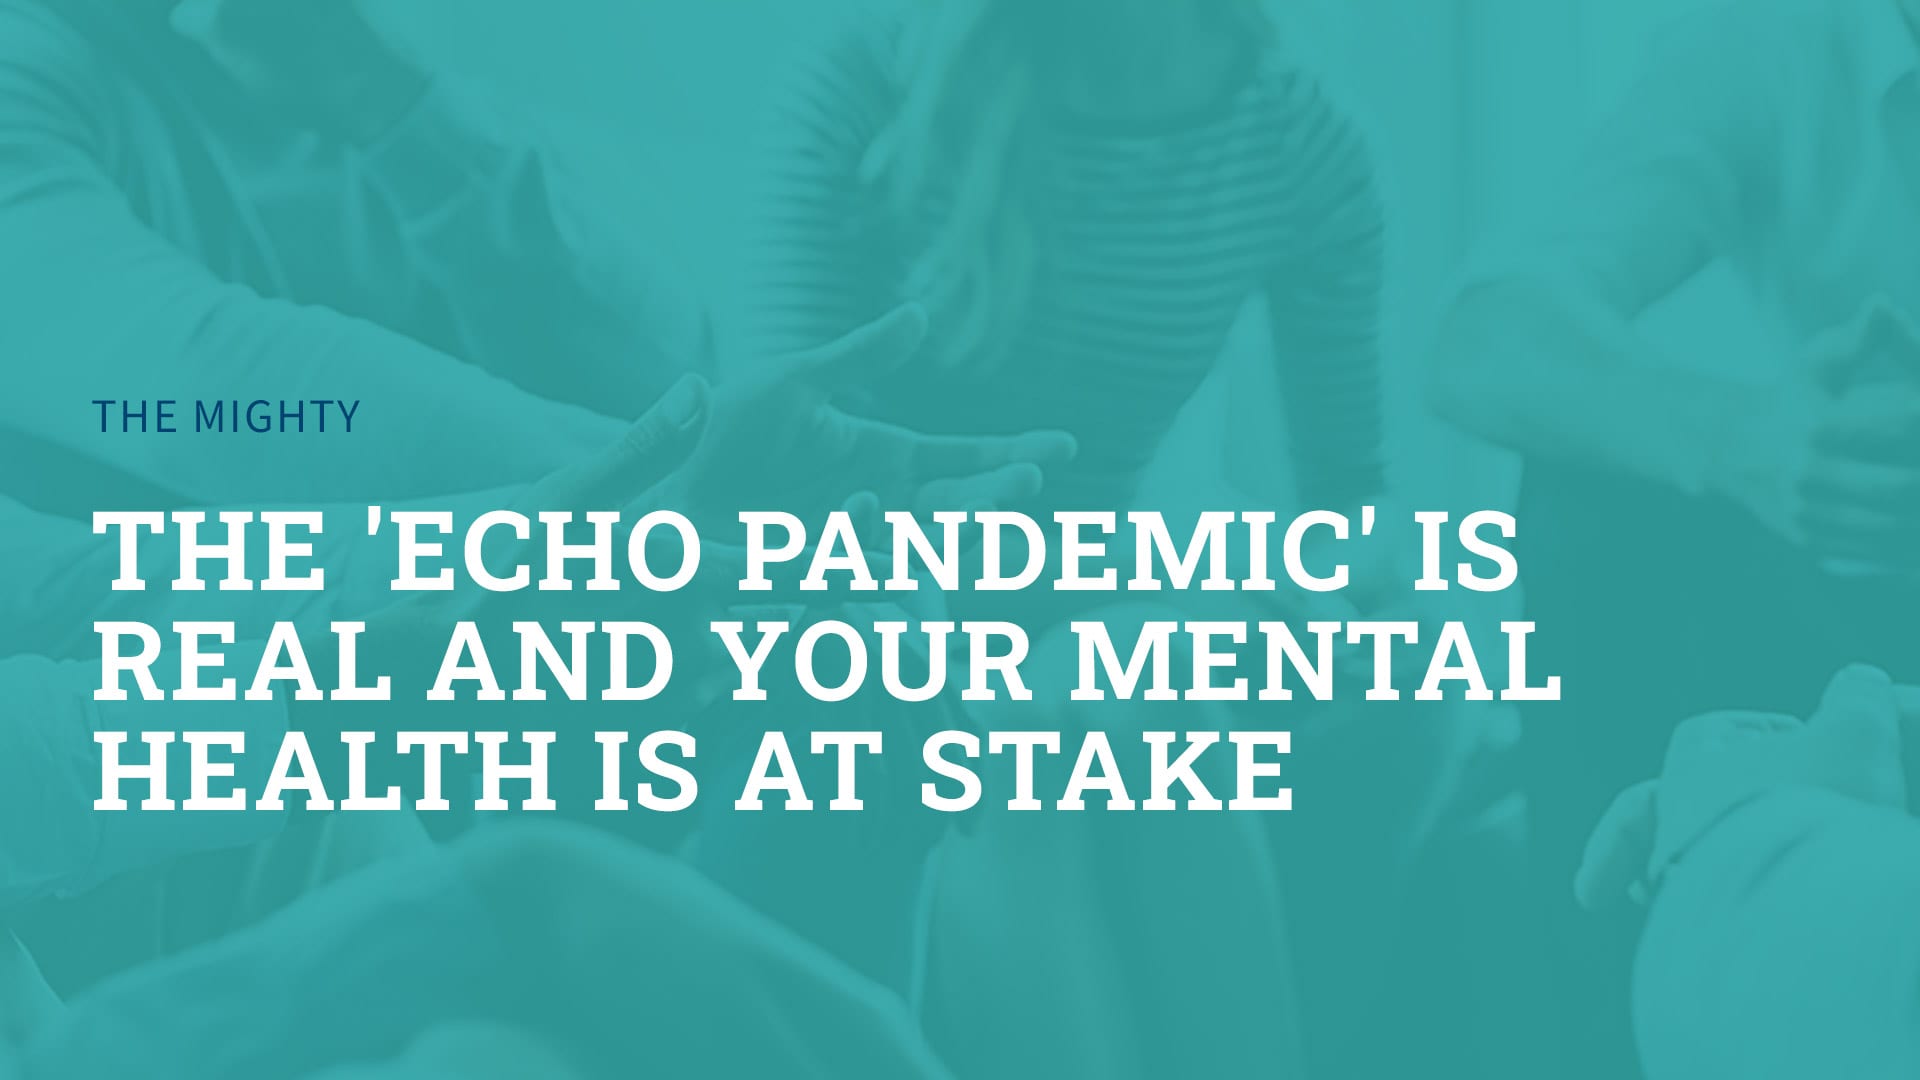 the echo pandemic is real and your mental health is at stake